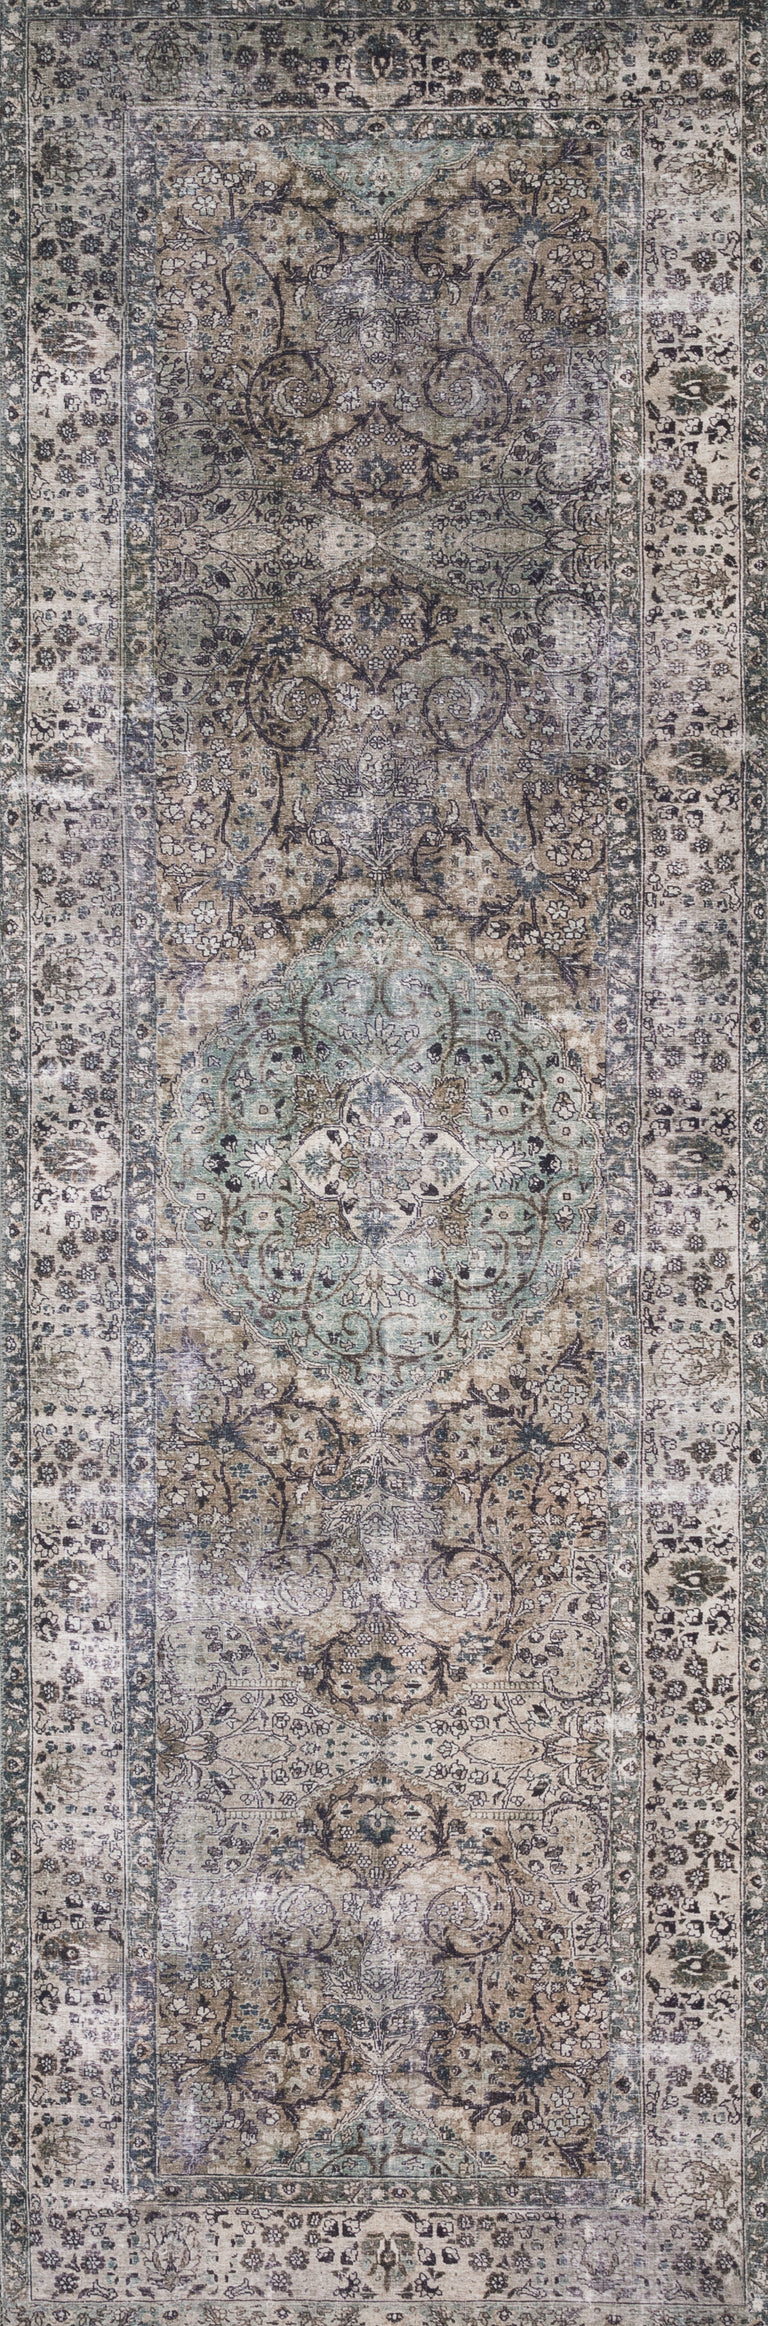 Loloi II Layla Collection Rug in Taupe, Stone - 2.5' x 7'6"